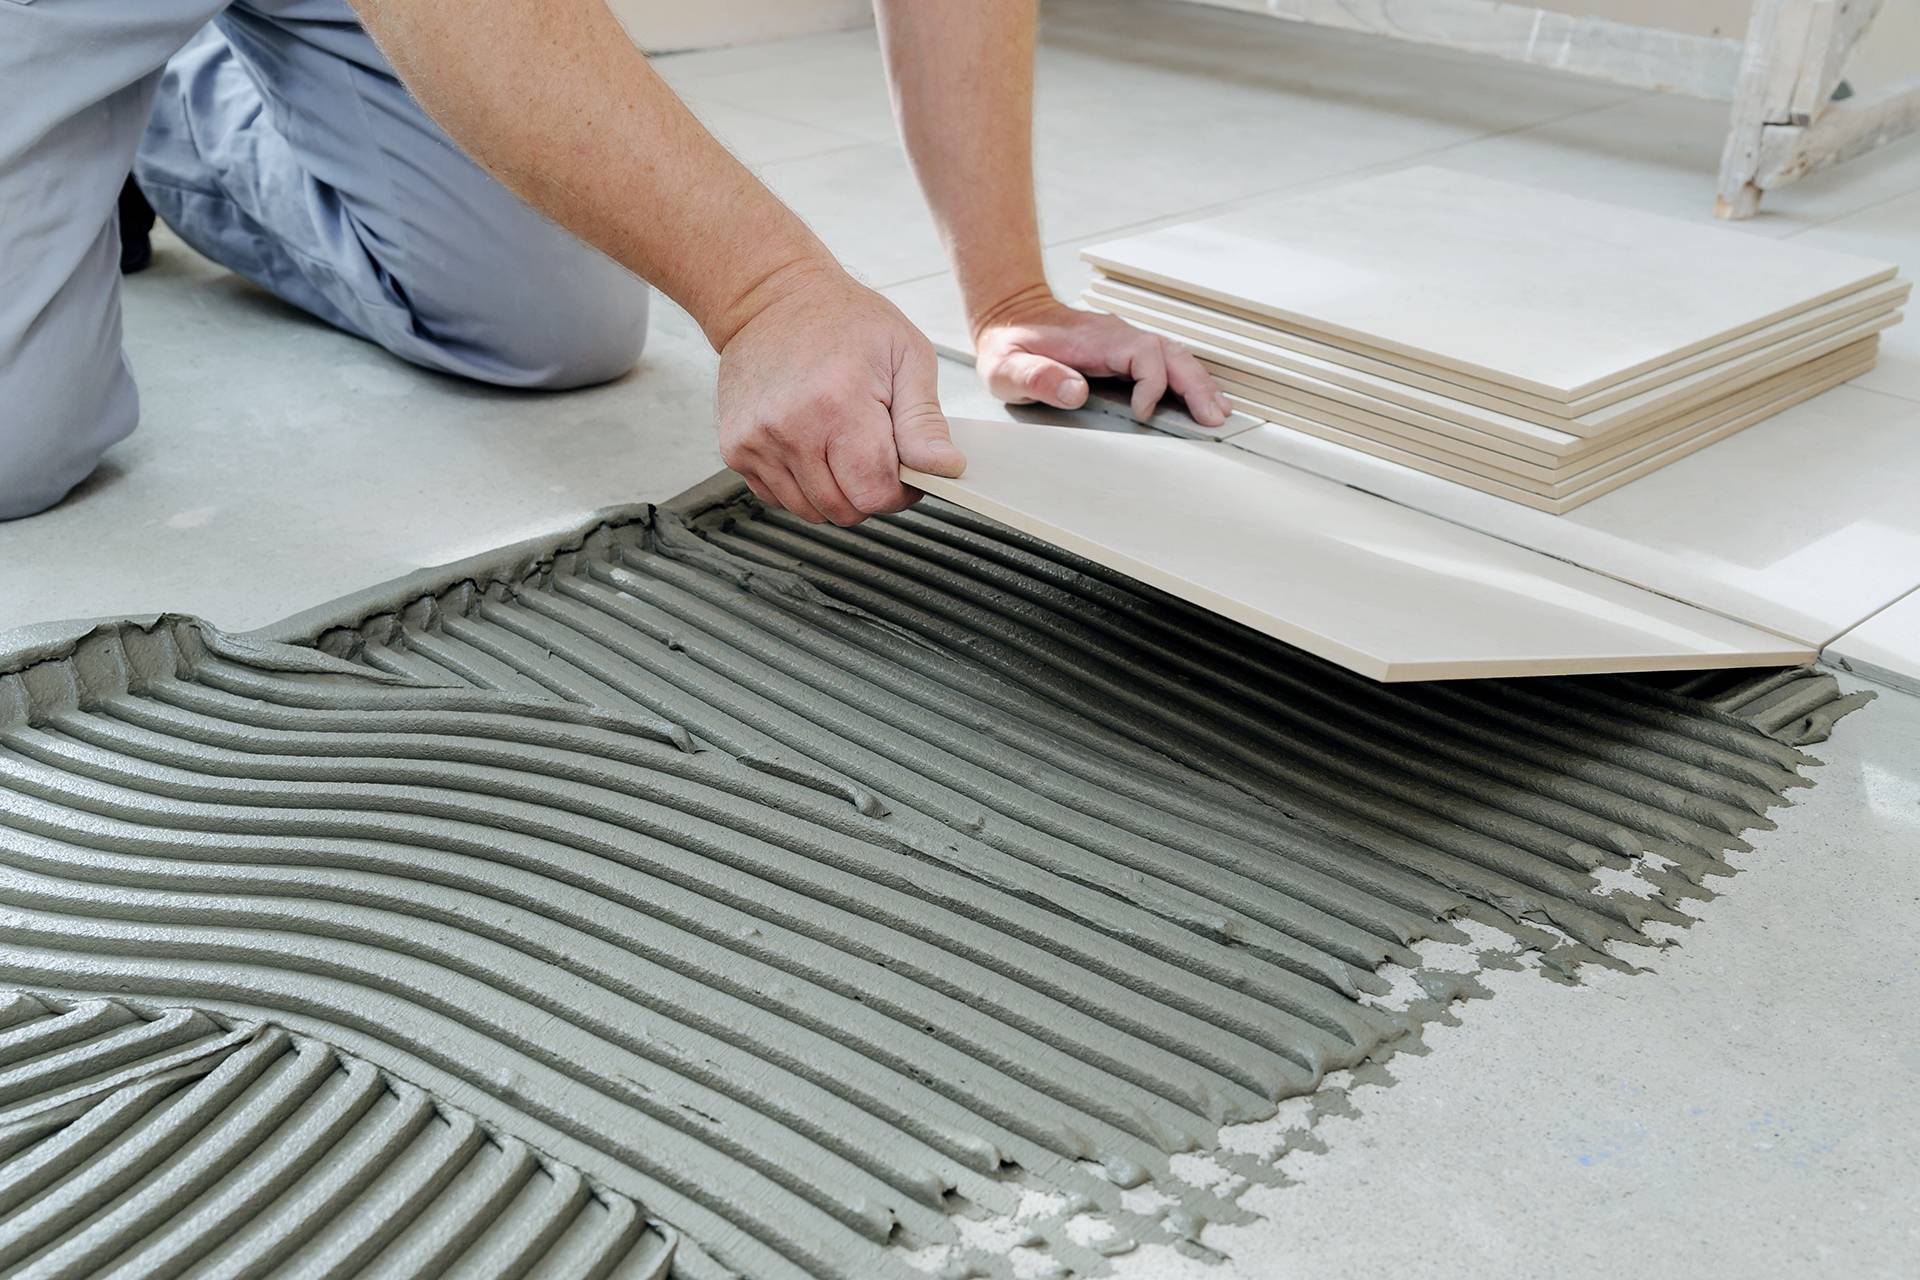 Things to Consider When Hiring a Tile Installer